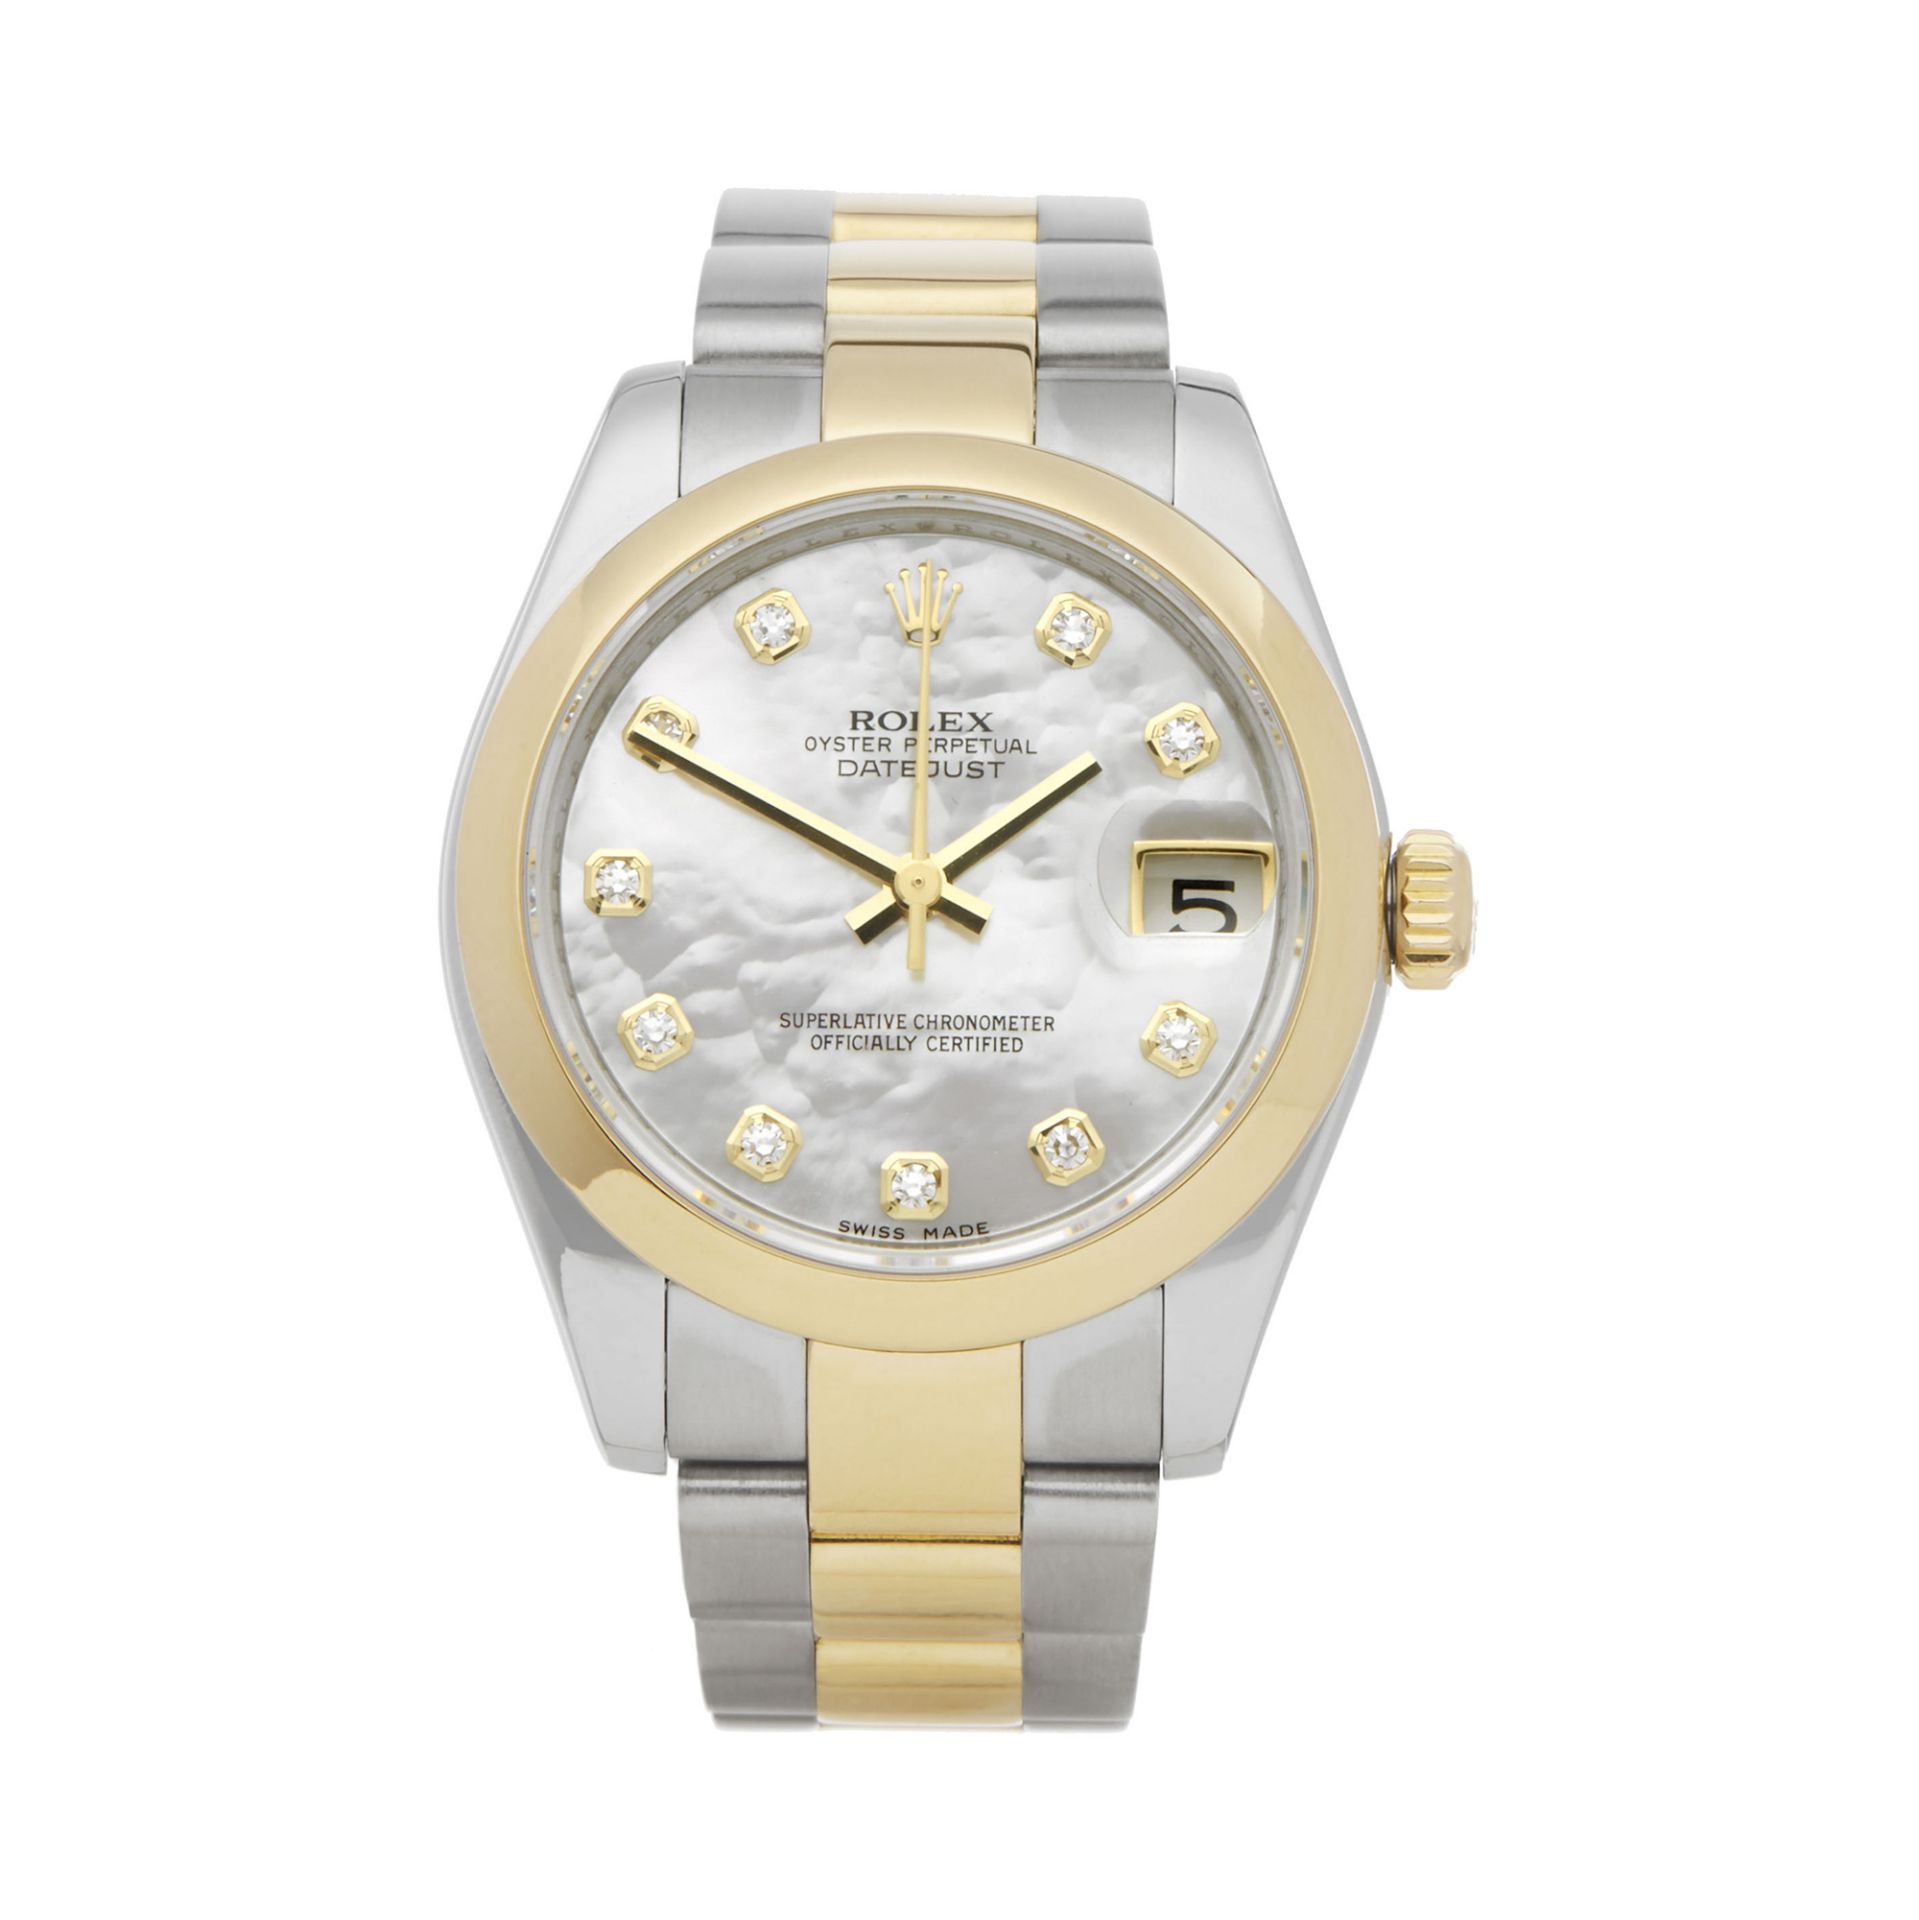 Rolex Datejust 31 178243 Ladies Stainless Steel & Yellow Gold Mother Of Pearl Diamond Watch - Image 7 of 7